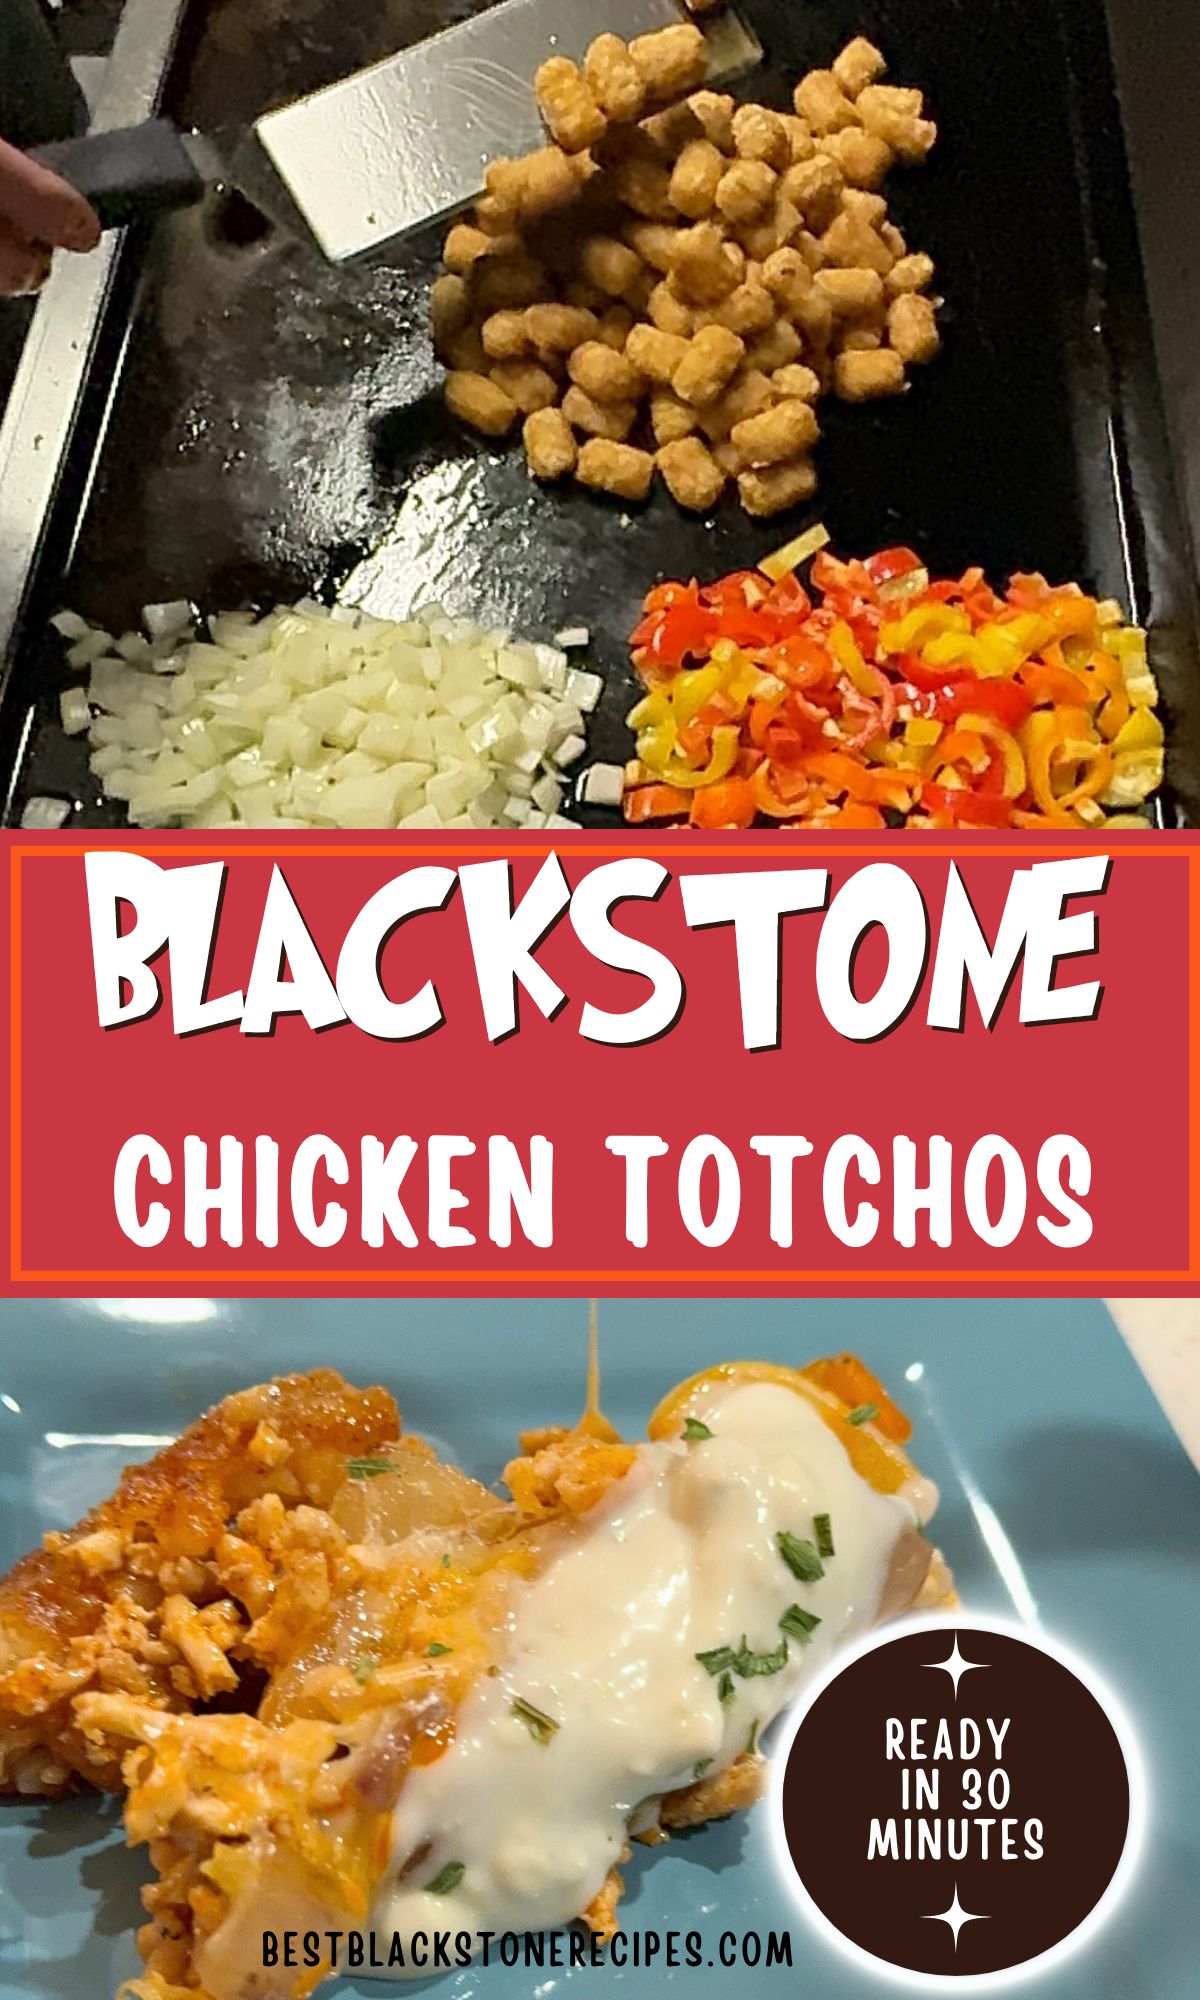 Promotional image for blackstone chicken totchos, featuring tater tots sizzling on a griddle with diced onions and sliced peppers, and a close-up of a cheesy totchos serving. ready in 30 minutes text.